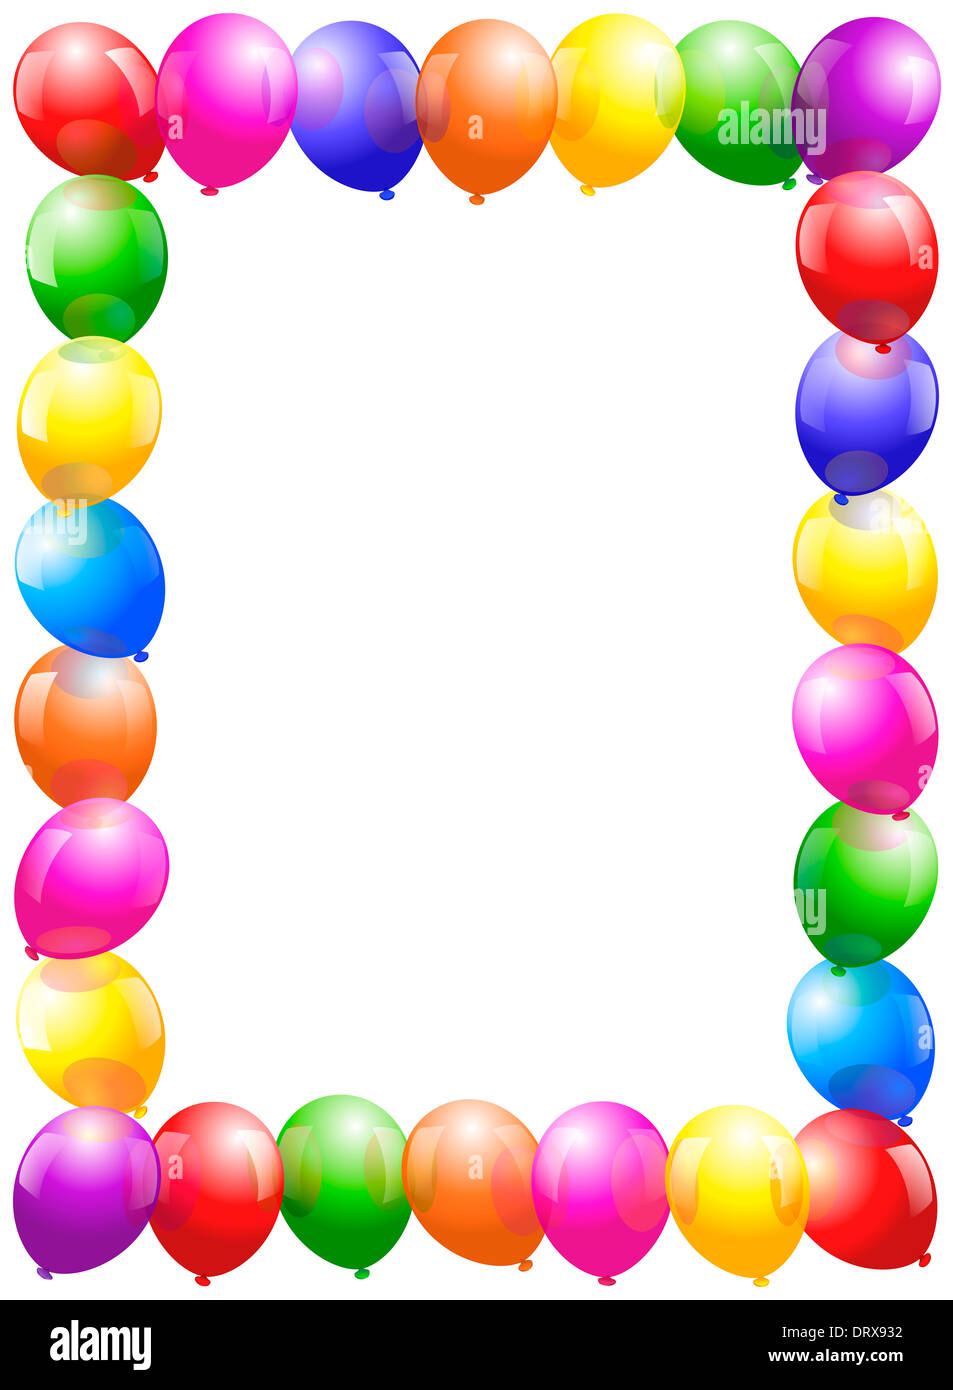 Colorful glossy balloons that form a frame - vertical portrait format. Stock Photo